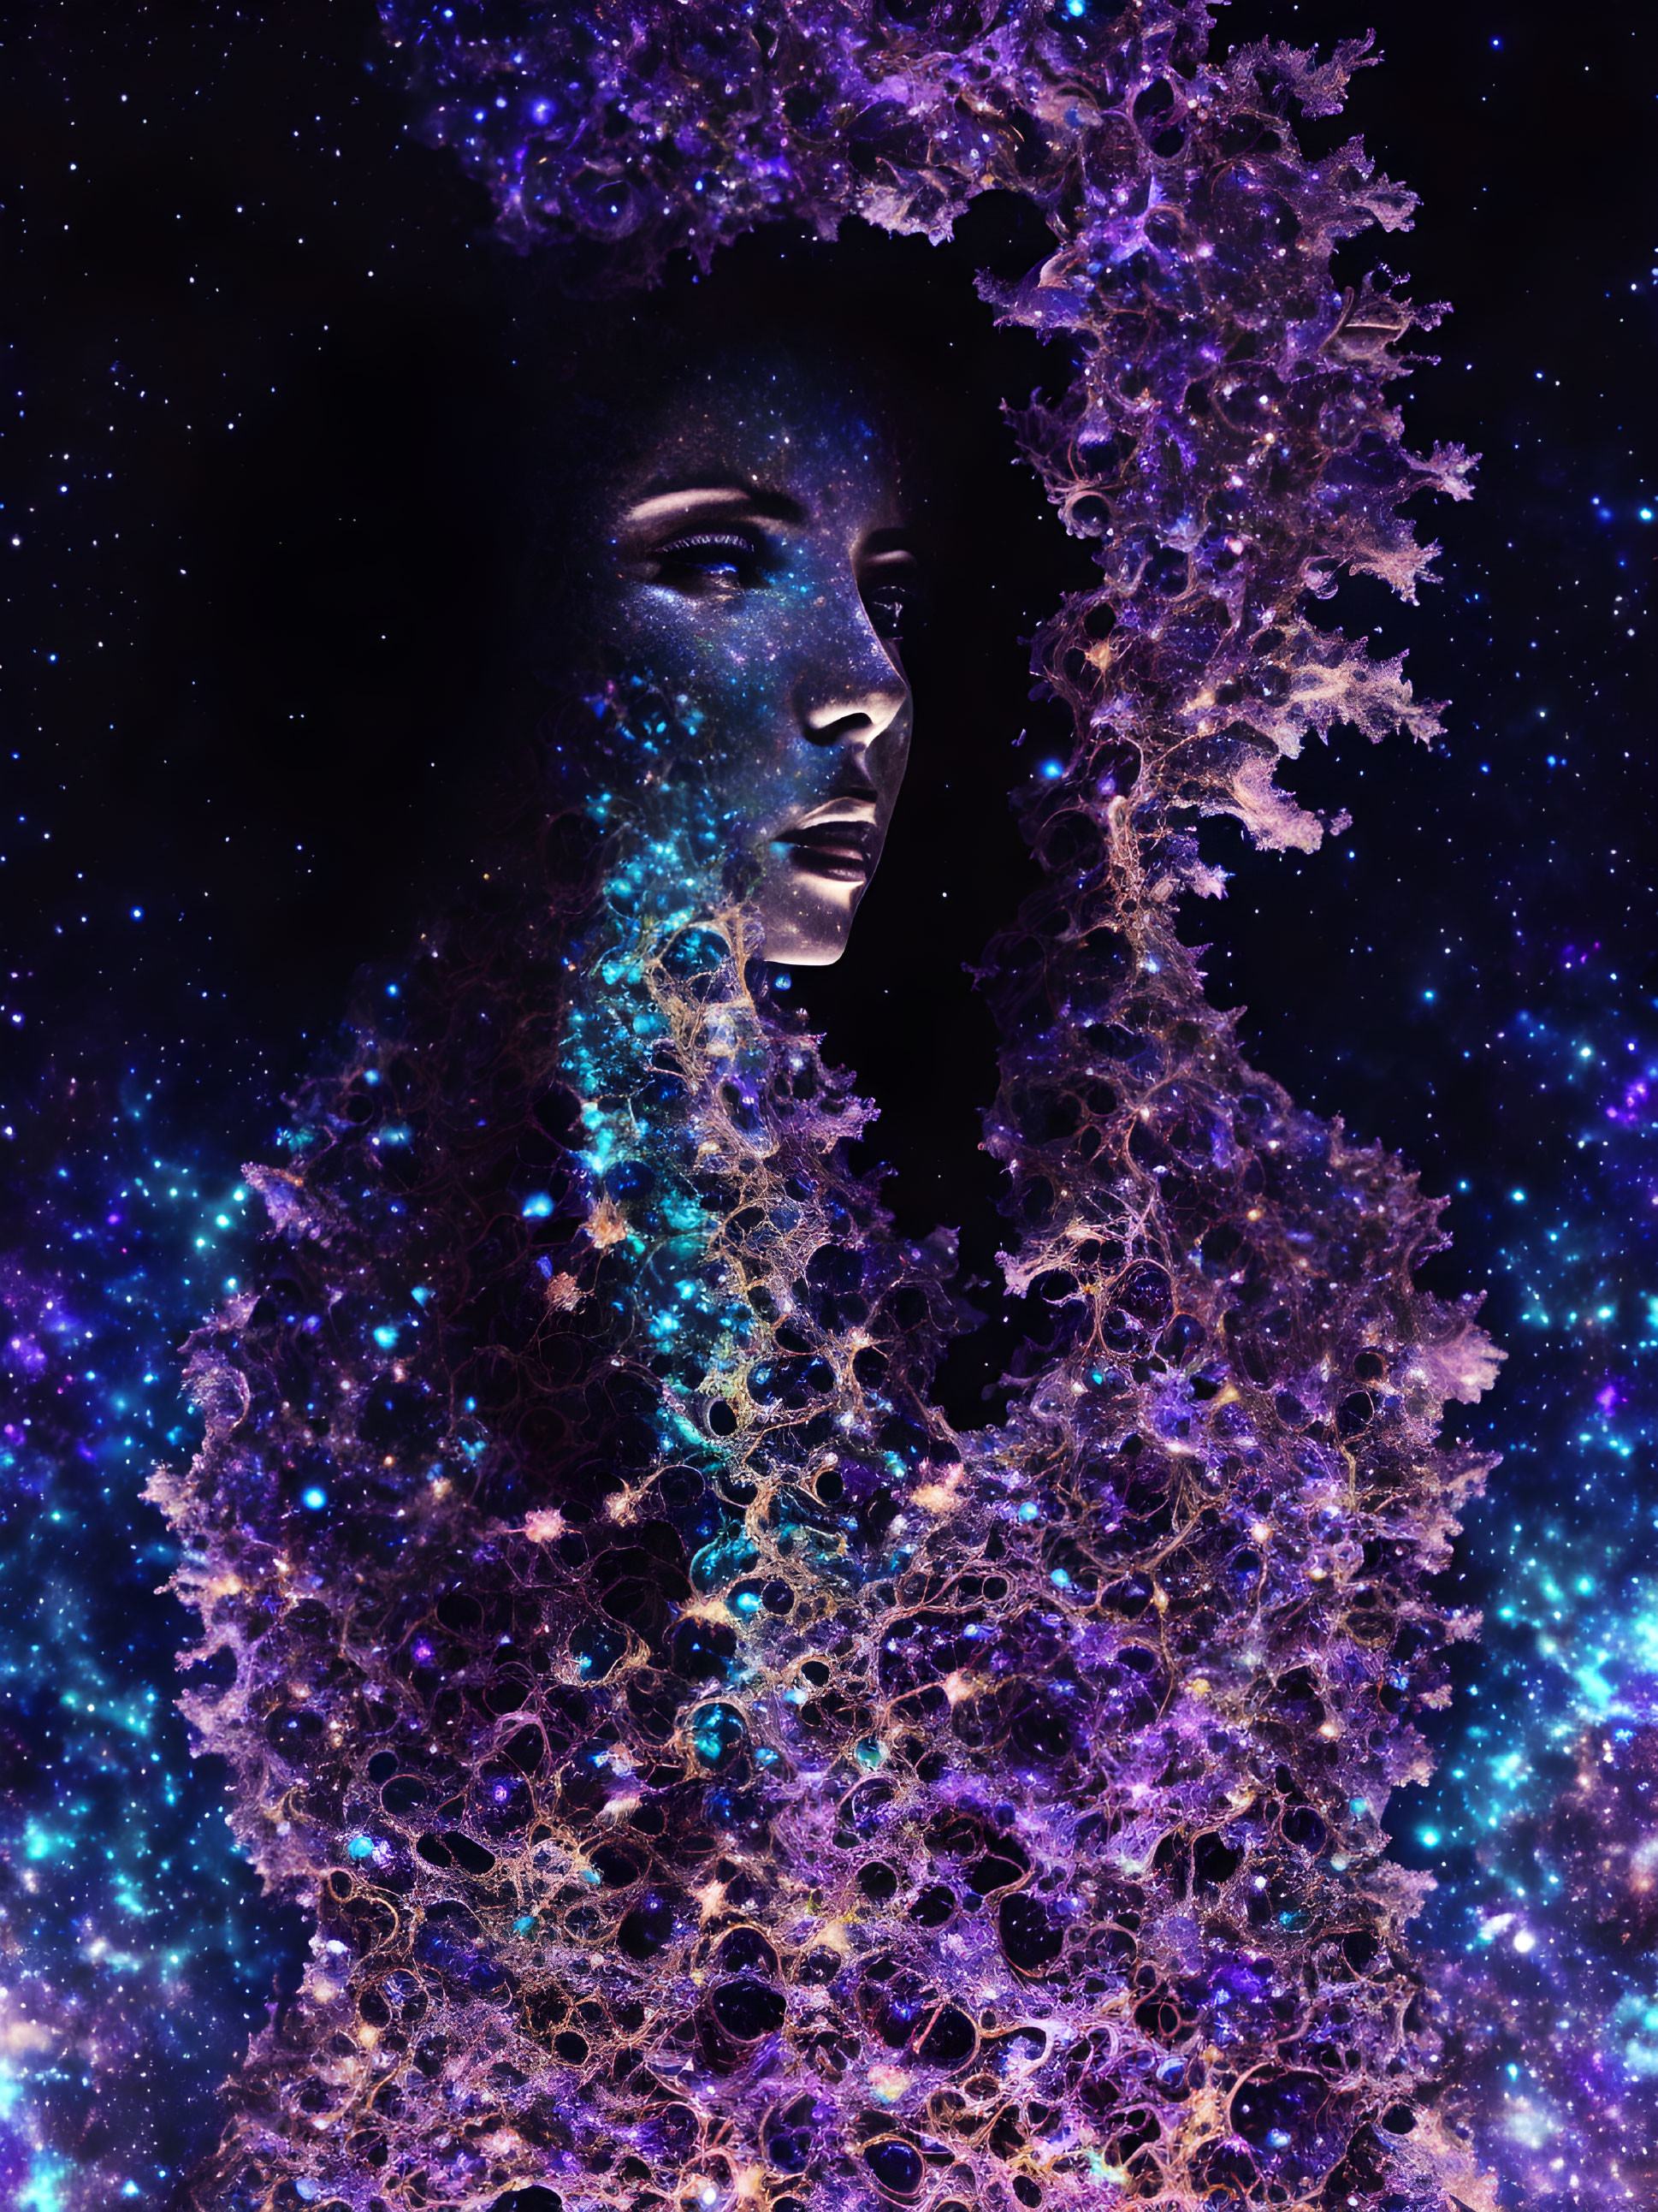 Surreal portrait of woman with cosmic elements